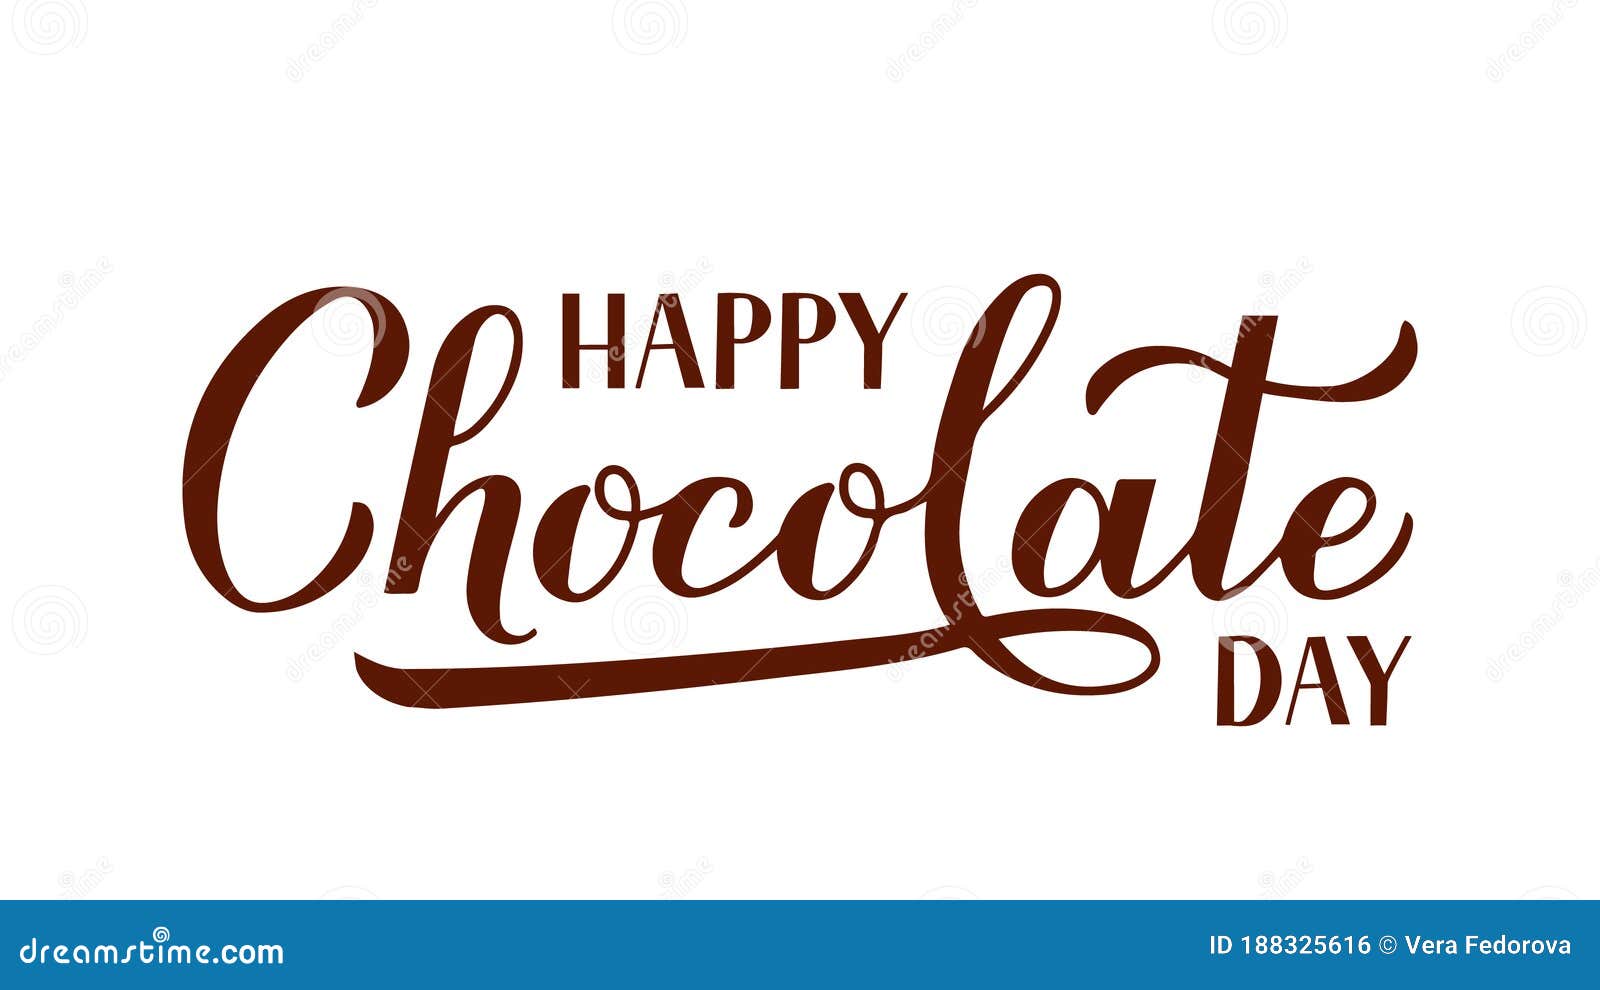 Happy Chocolate Day Calligraphy Hand Lettering Isolated on White ...